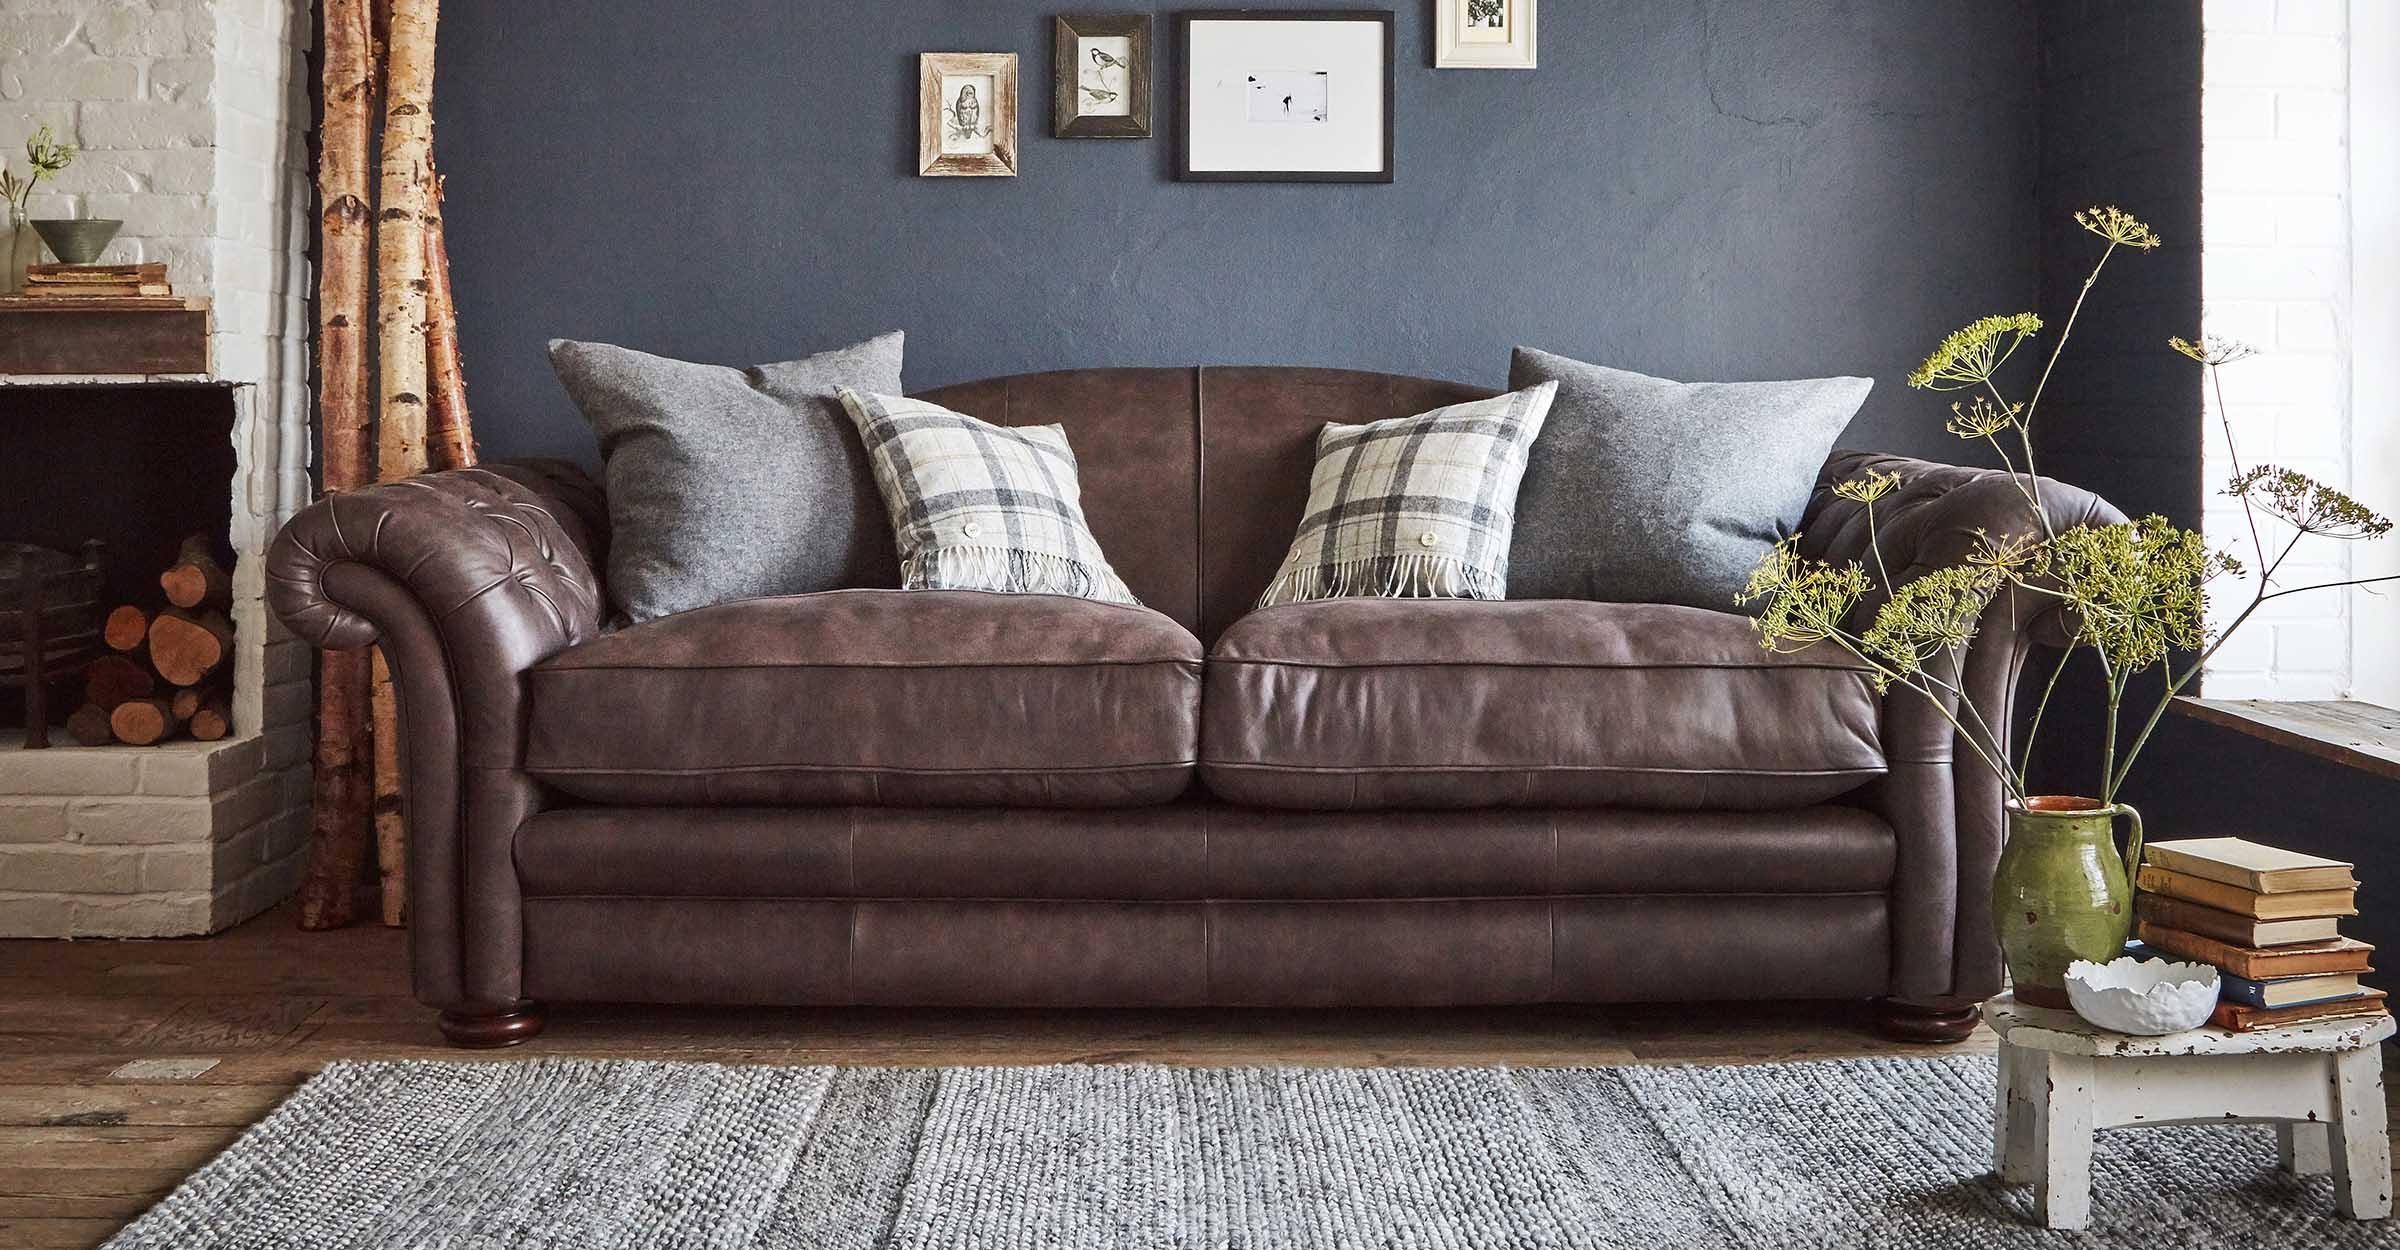 Brown Sofas Dfs, Best Colour Cushions For Brown Leather Sofa